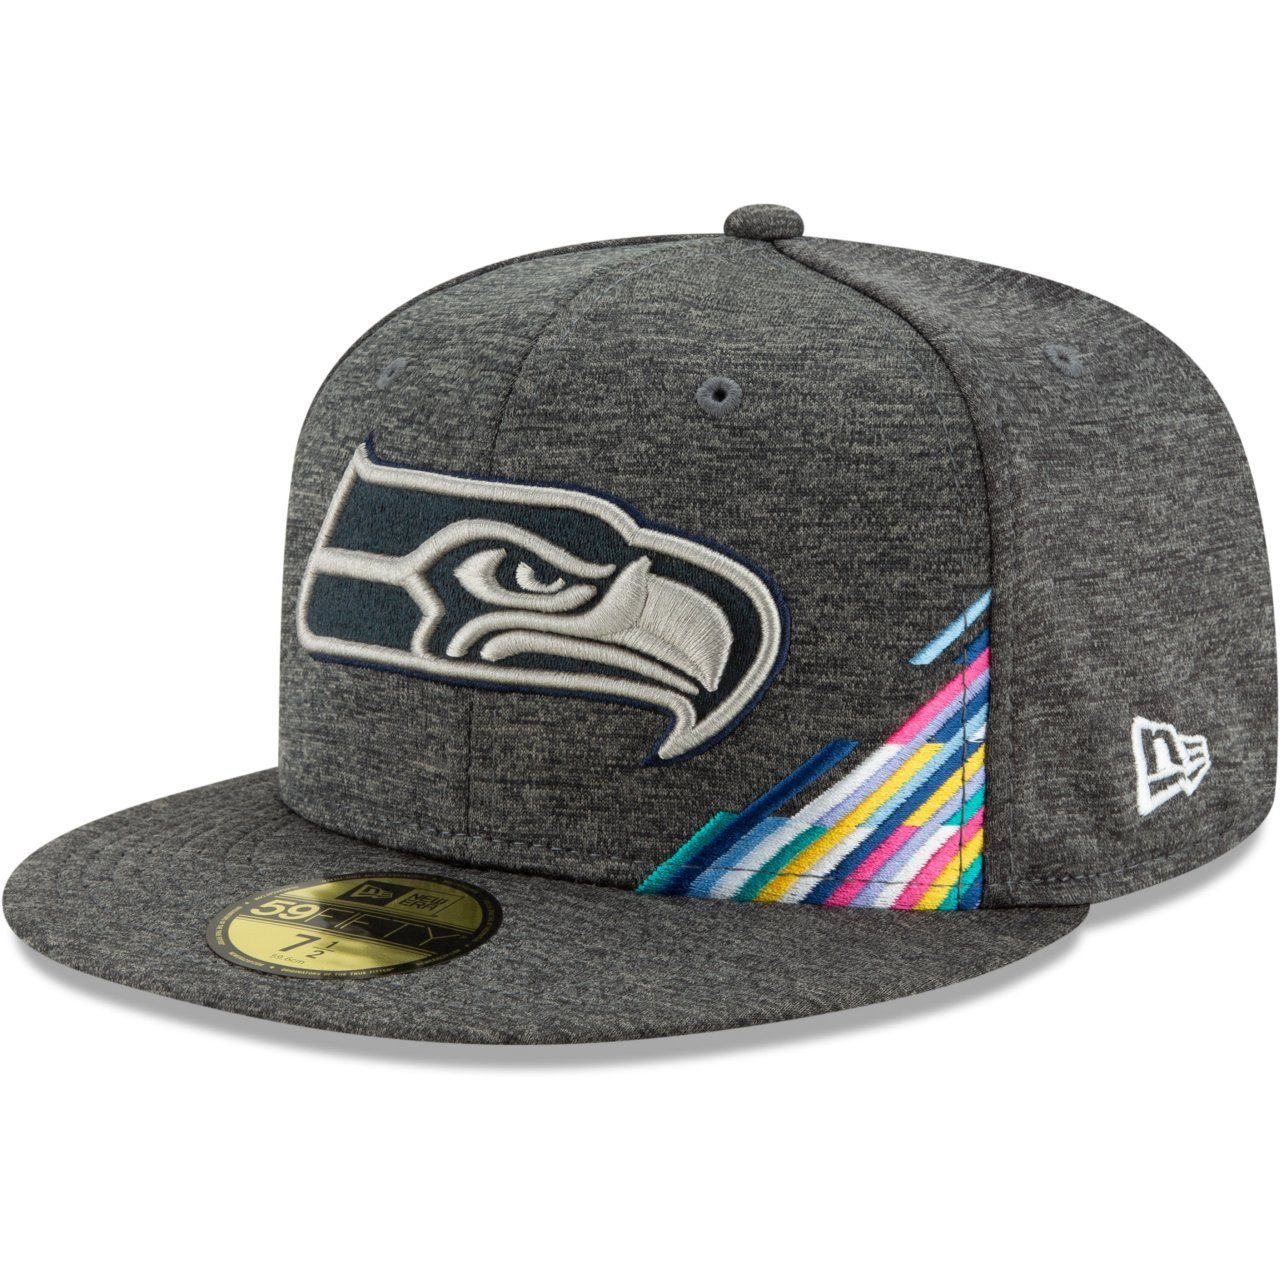 New Fitted Teams Seahawks 59Fifty NFL Seattle Cap CATCH Era CRUCIAL